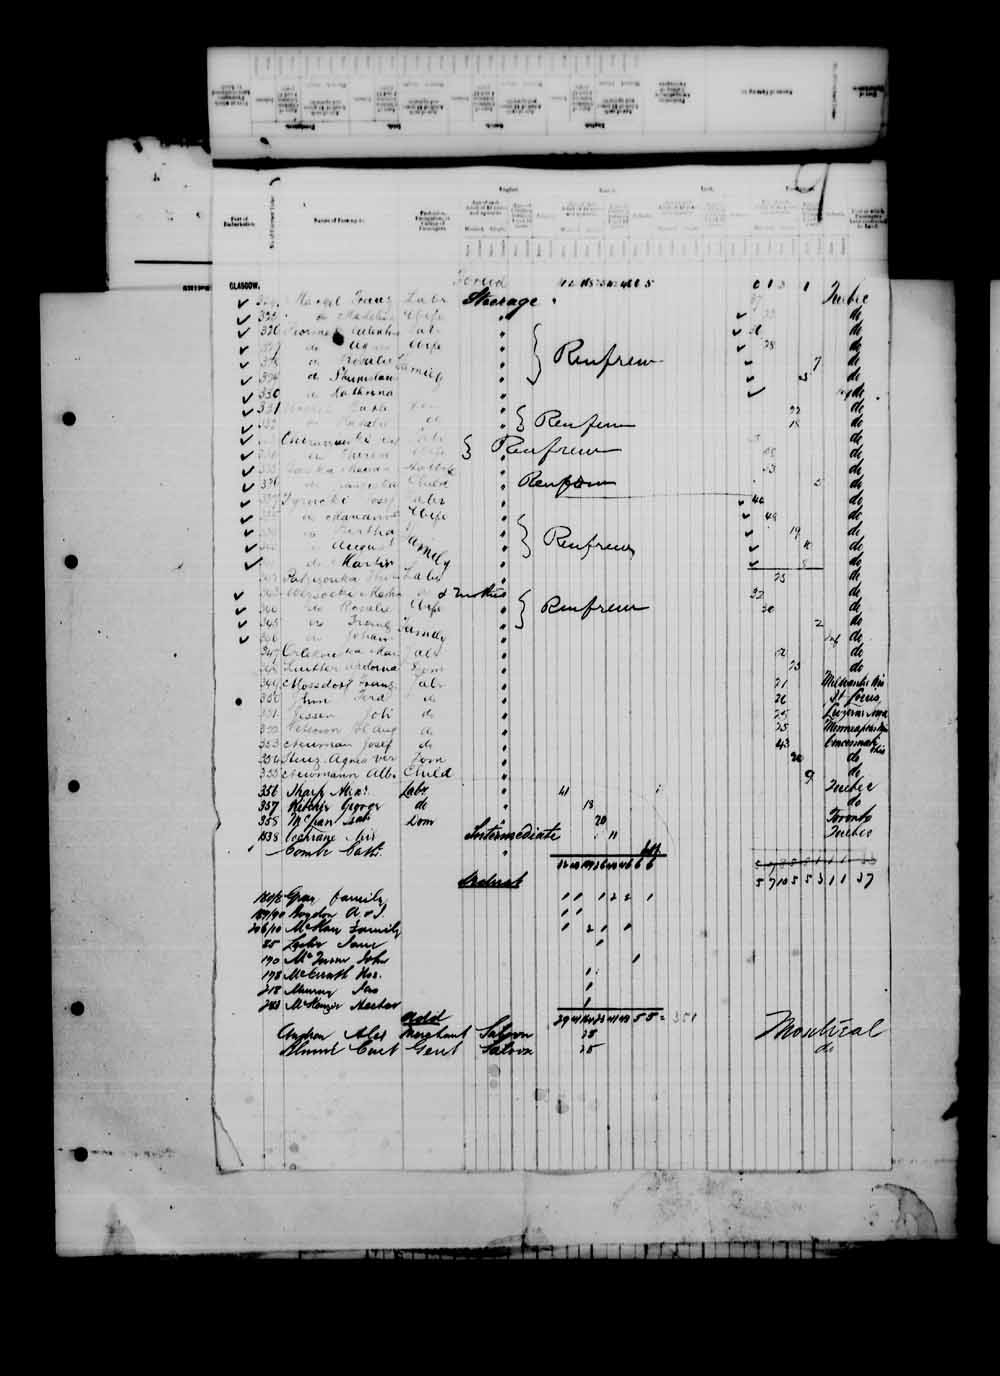 Digitized page of Passenger Lists for Image No.: e003542774